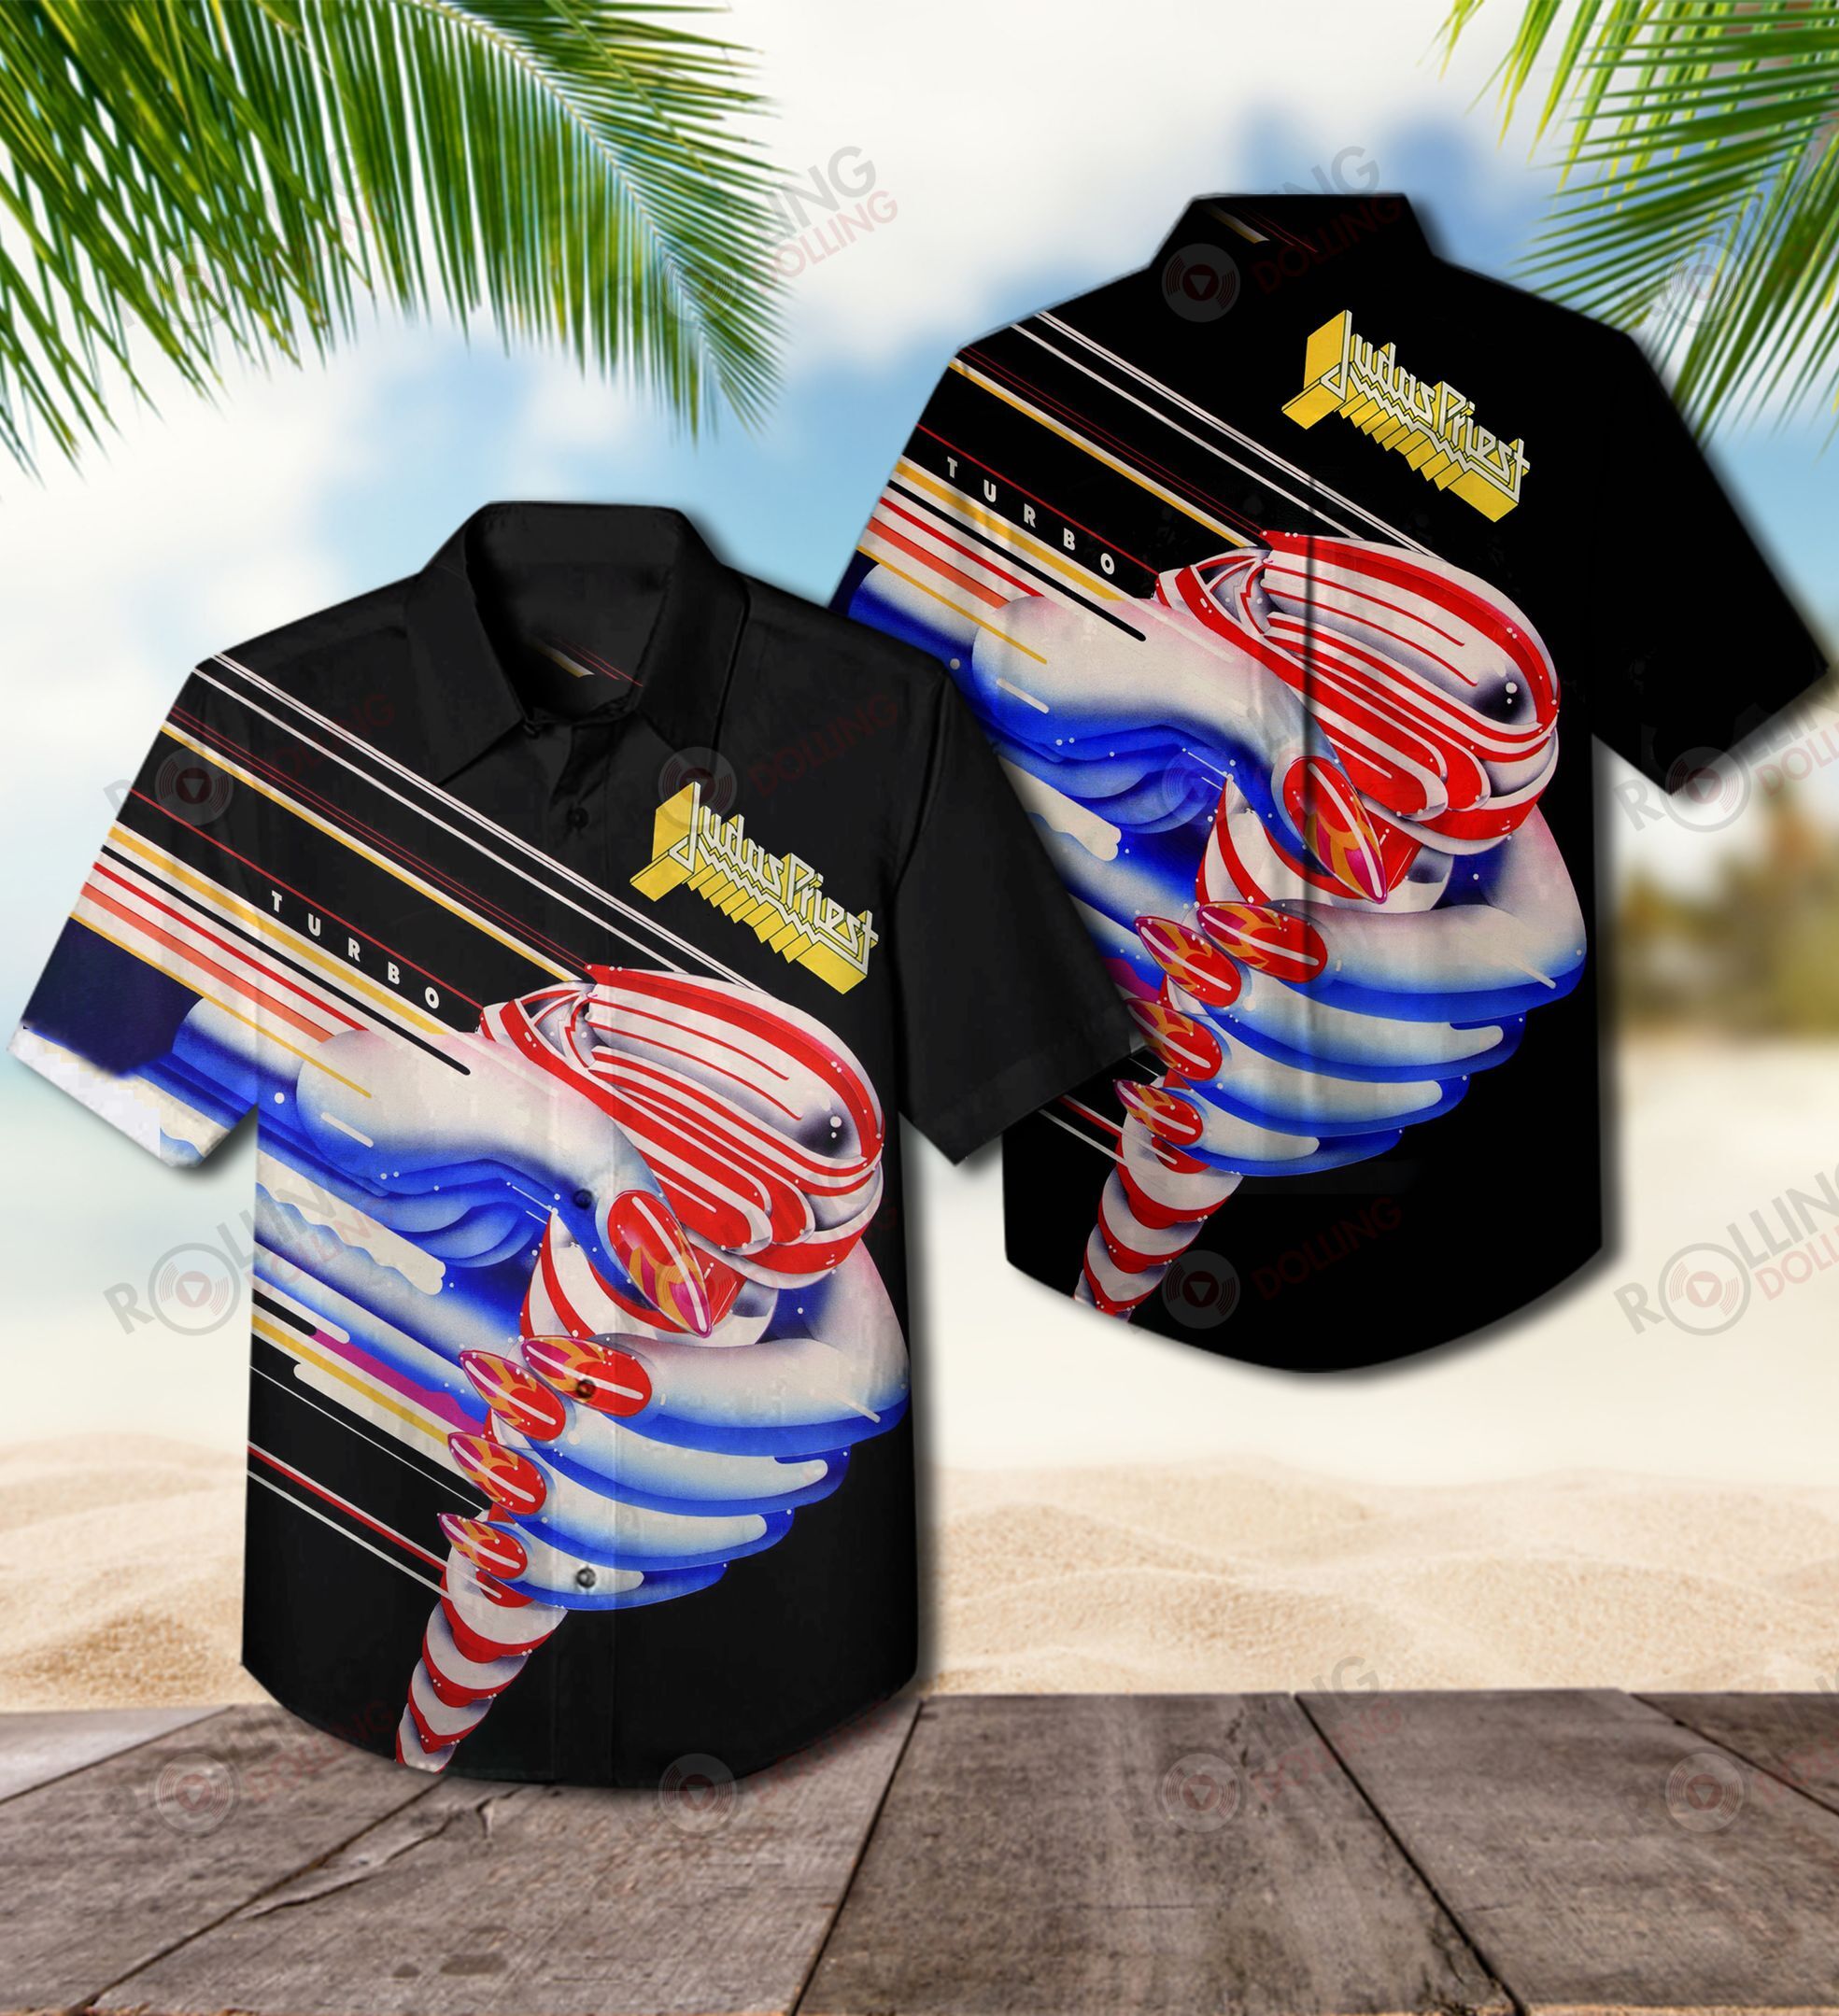 This would make a great gift for any fan who loves Hawaiian Shirt as well as Rock band 229